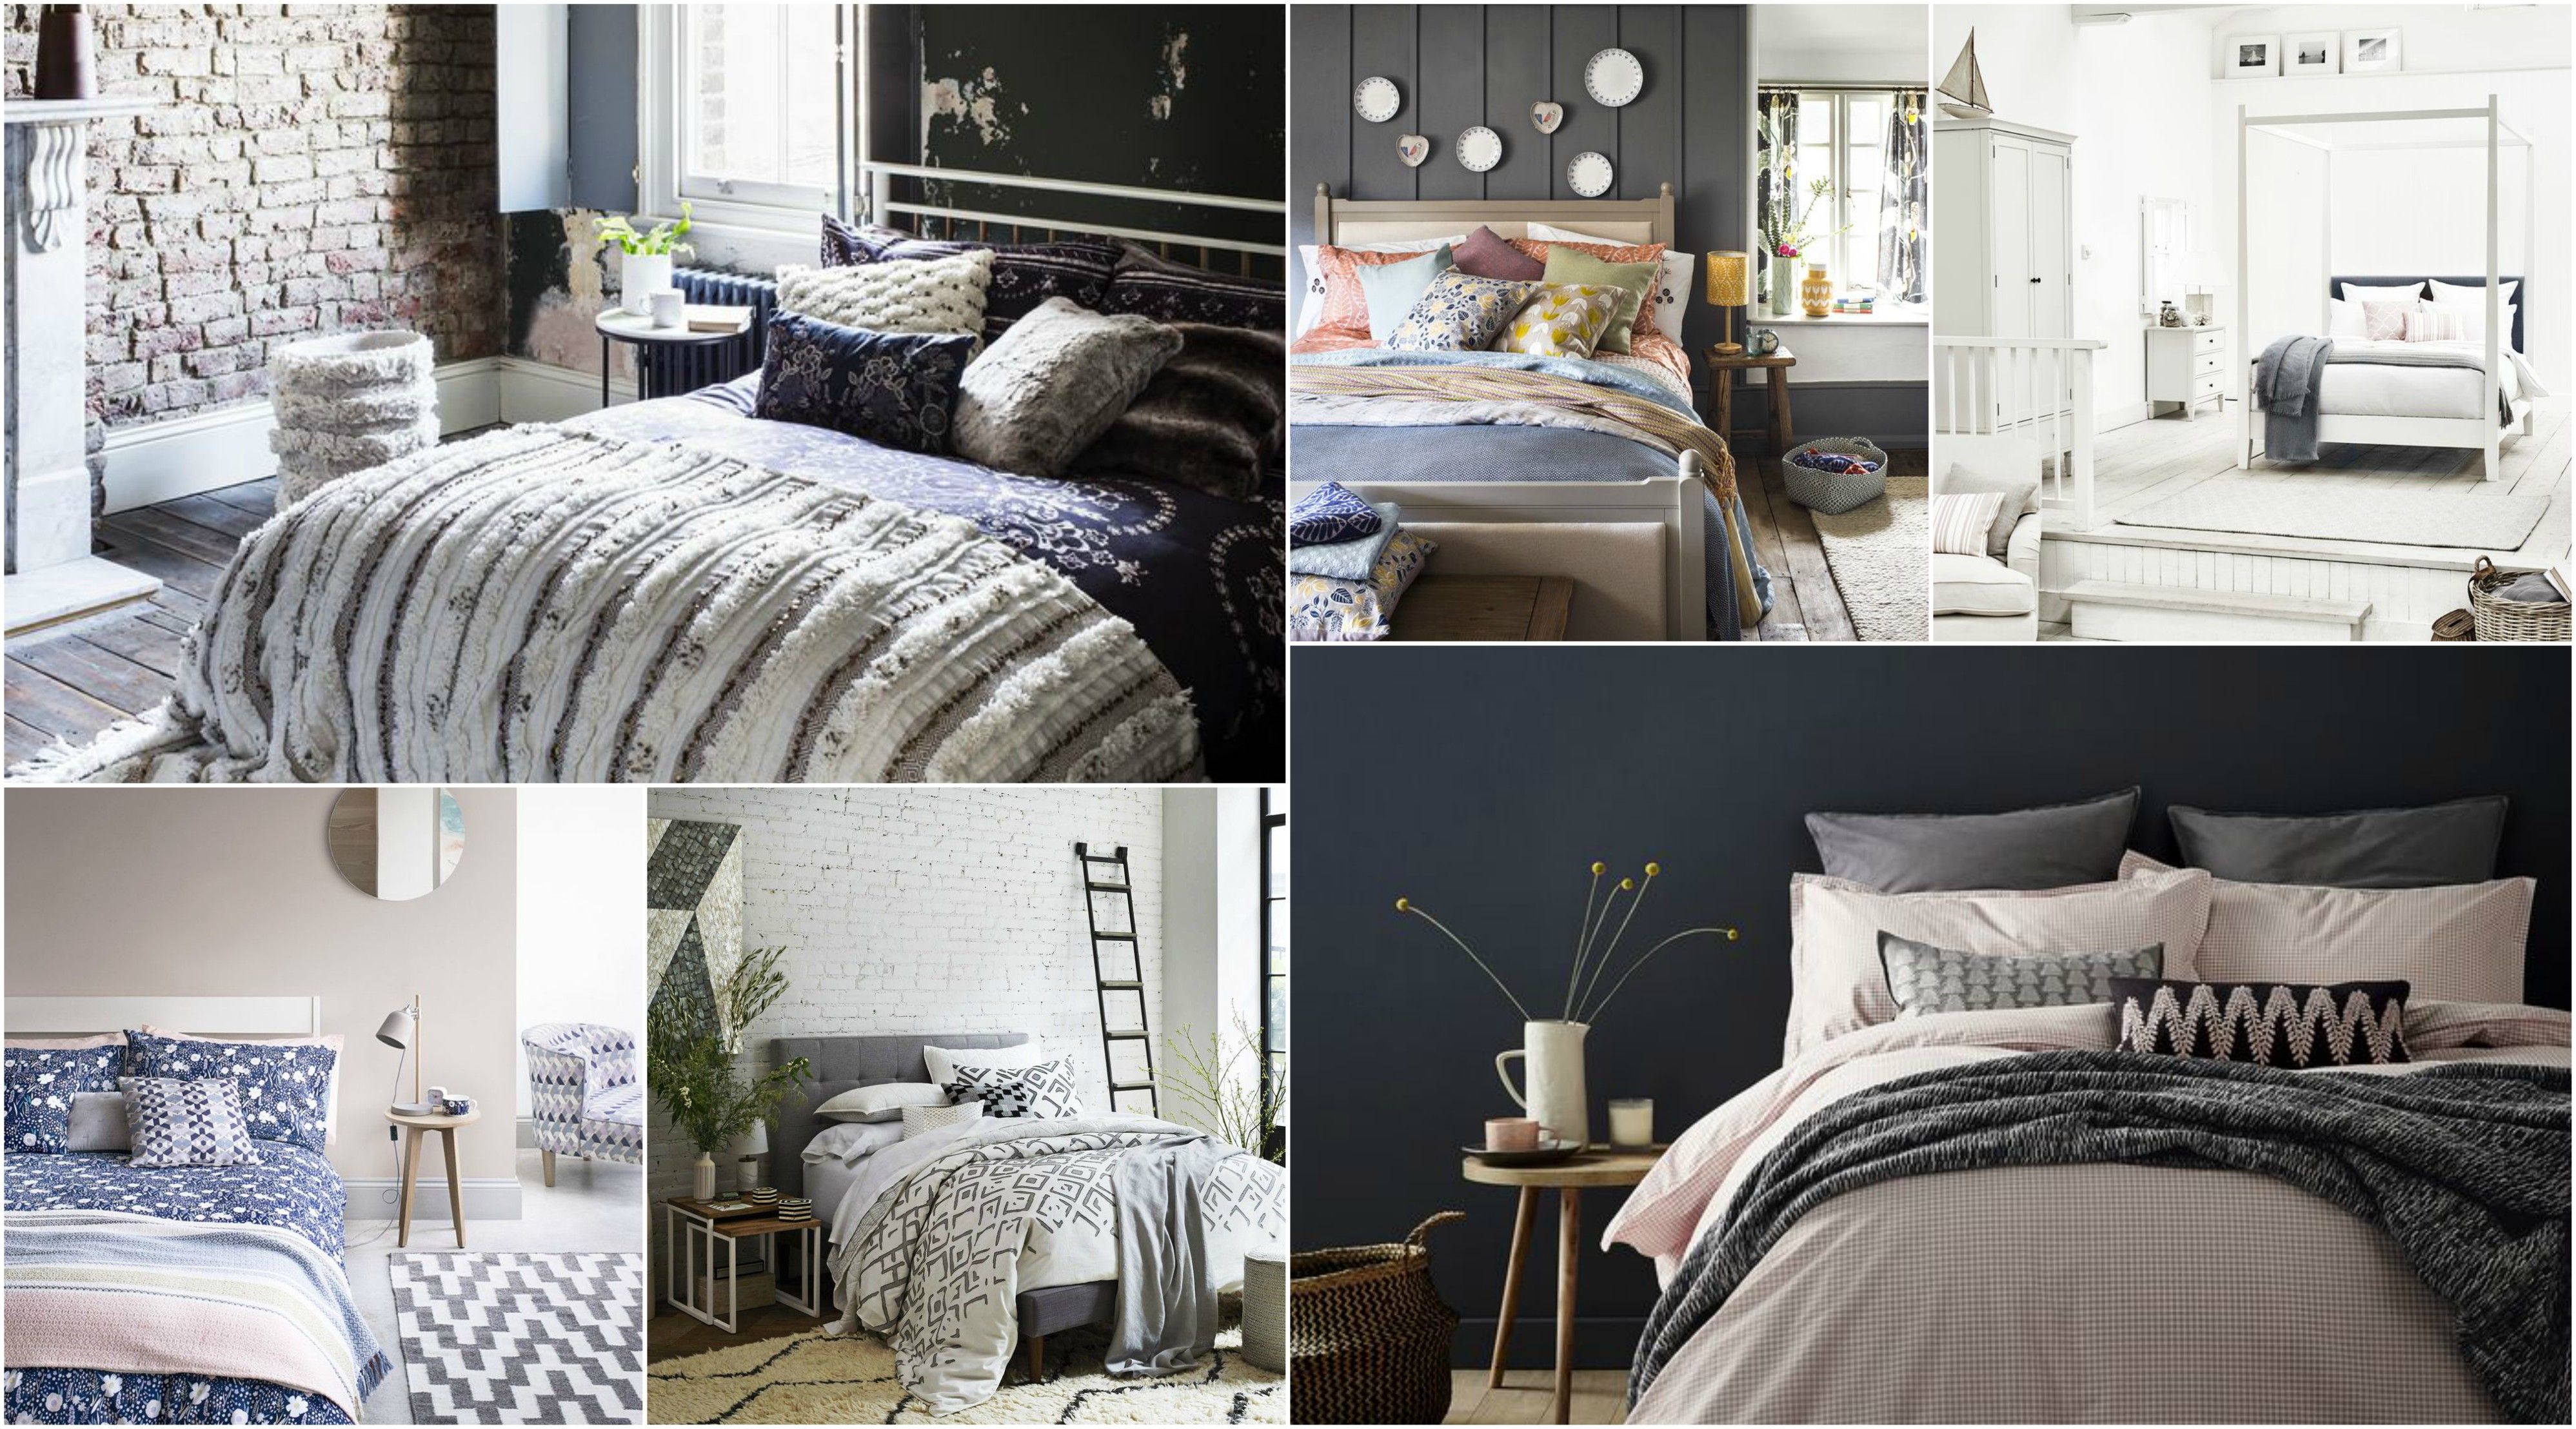 Pinterest worthy bedrooms ideas and inspiration to create your ...